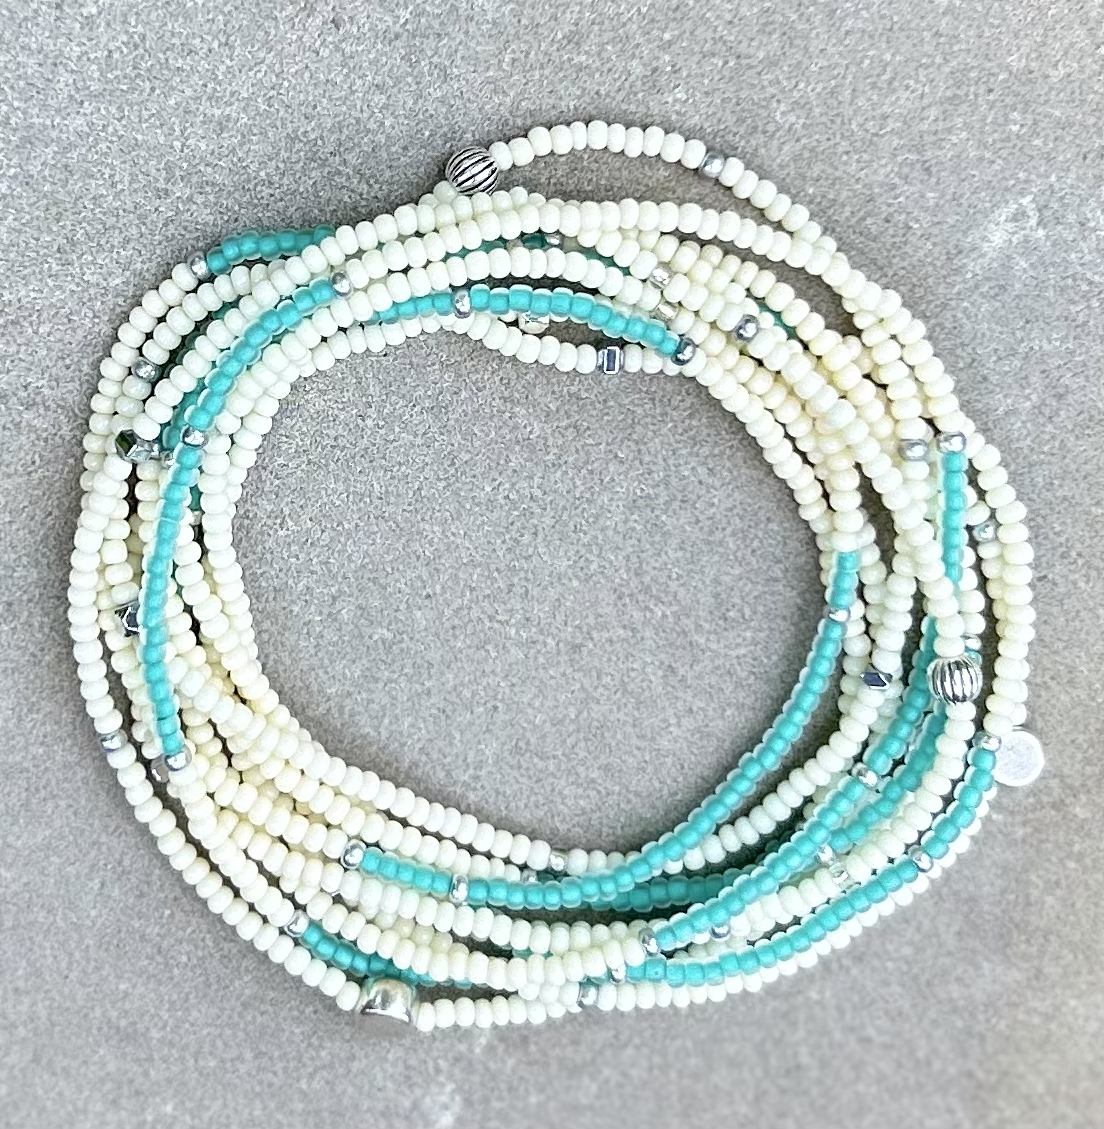 Double-Up 2-Piece Translucent Turquoise & White Silver-Sprinkle Beaded Wrap Bracelet